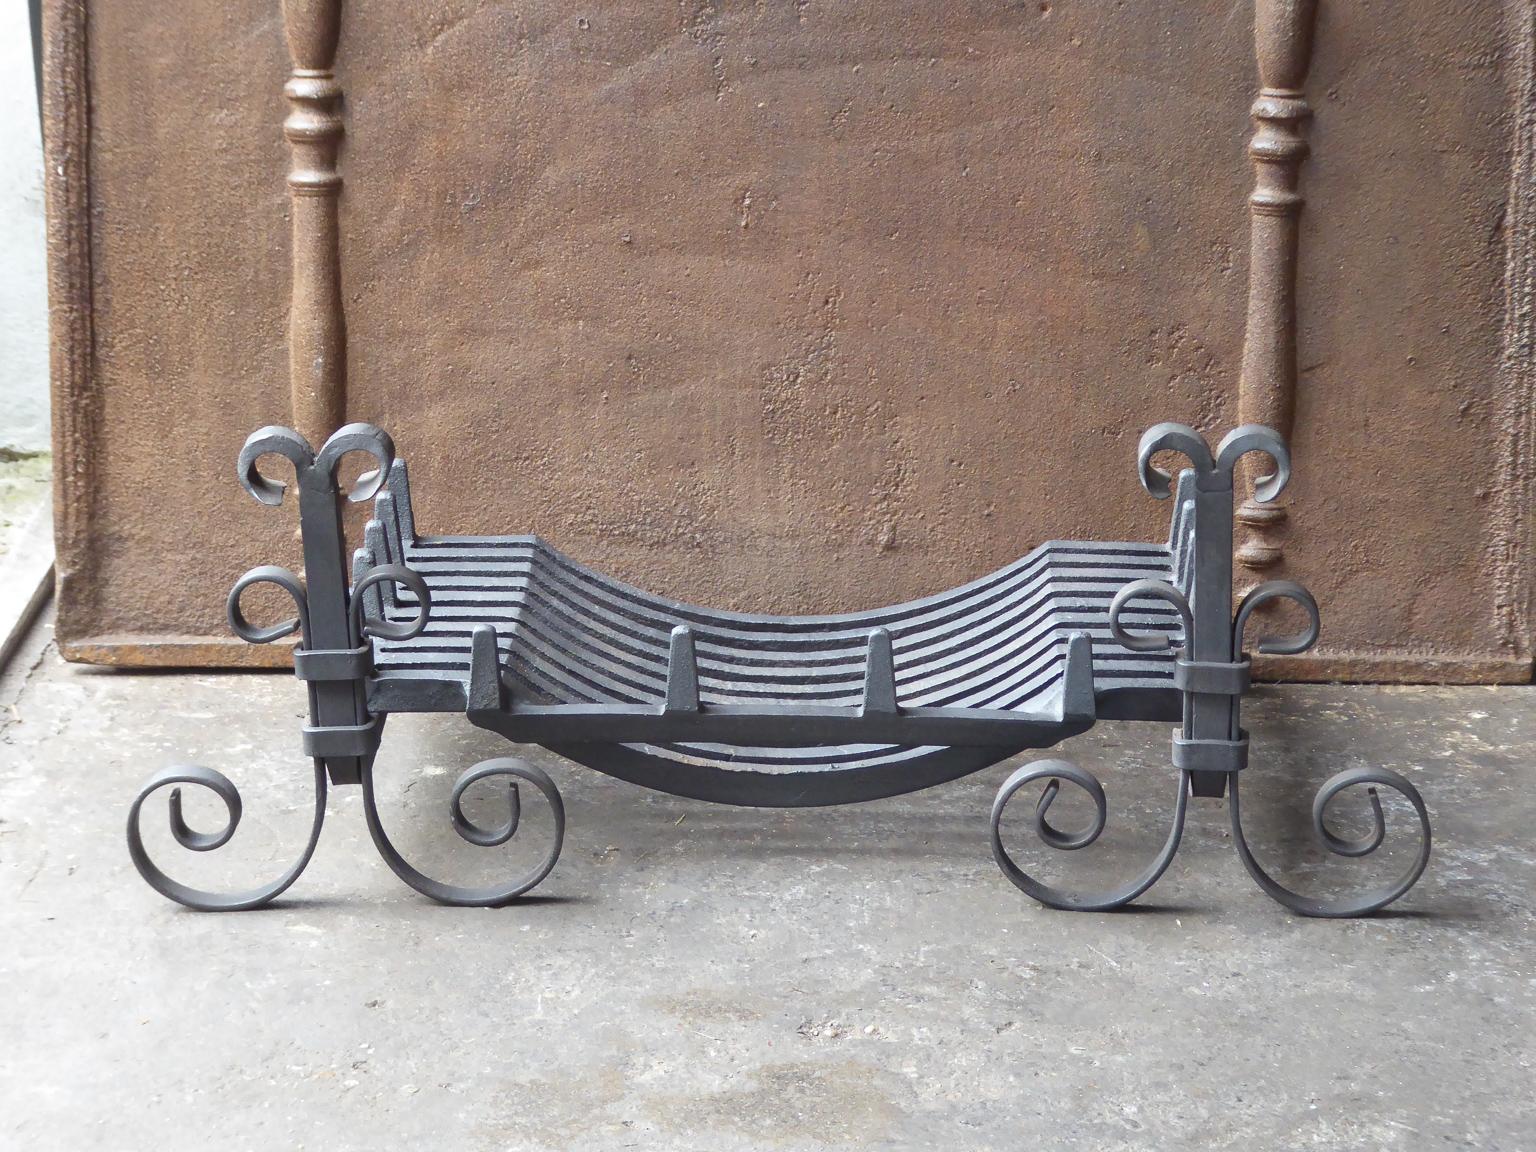 English Victorian style fireplace basket or fire basket. The fireplace grate is made of wrought iron and cast iron. The total width of the front of the grate is 35 inch (89 cm).

















